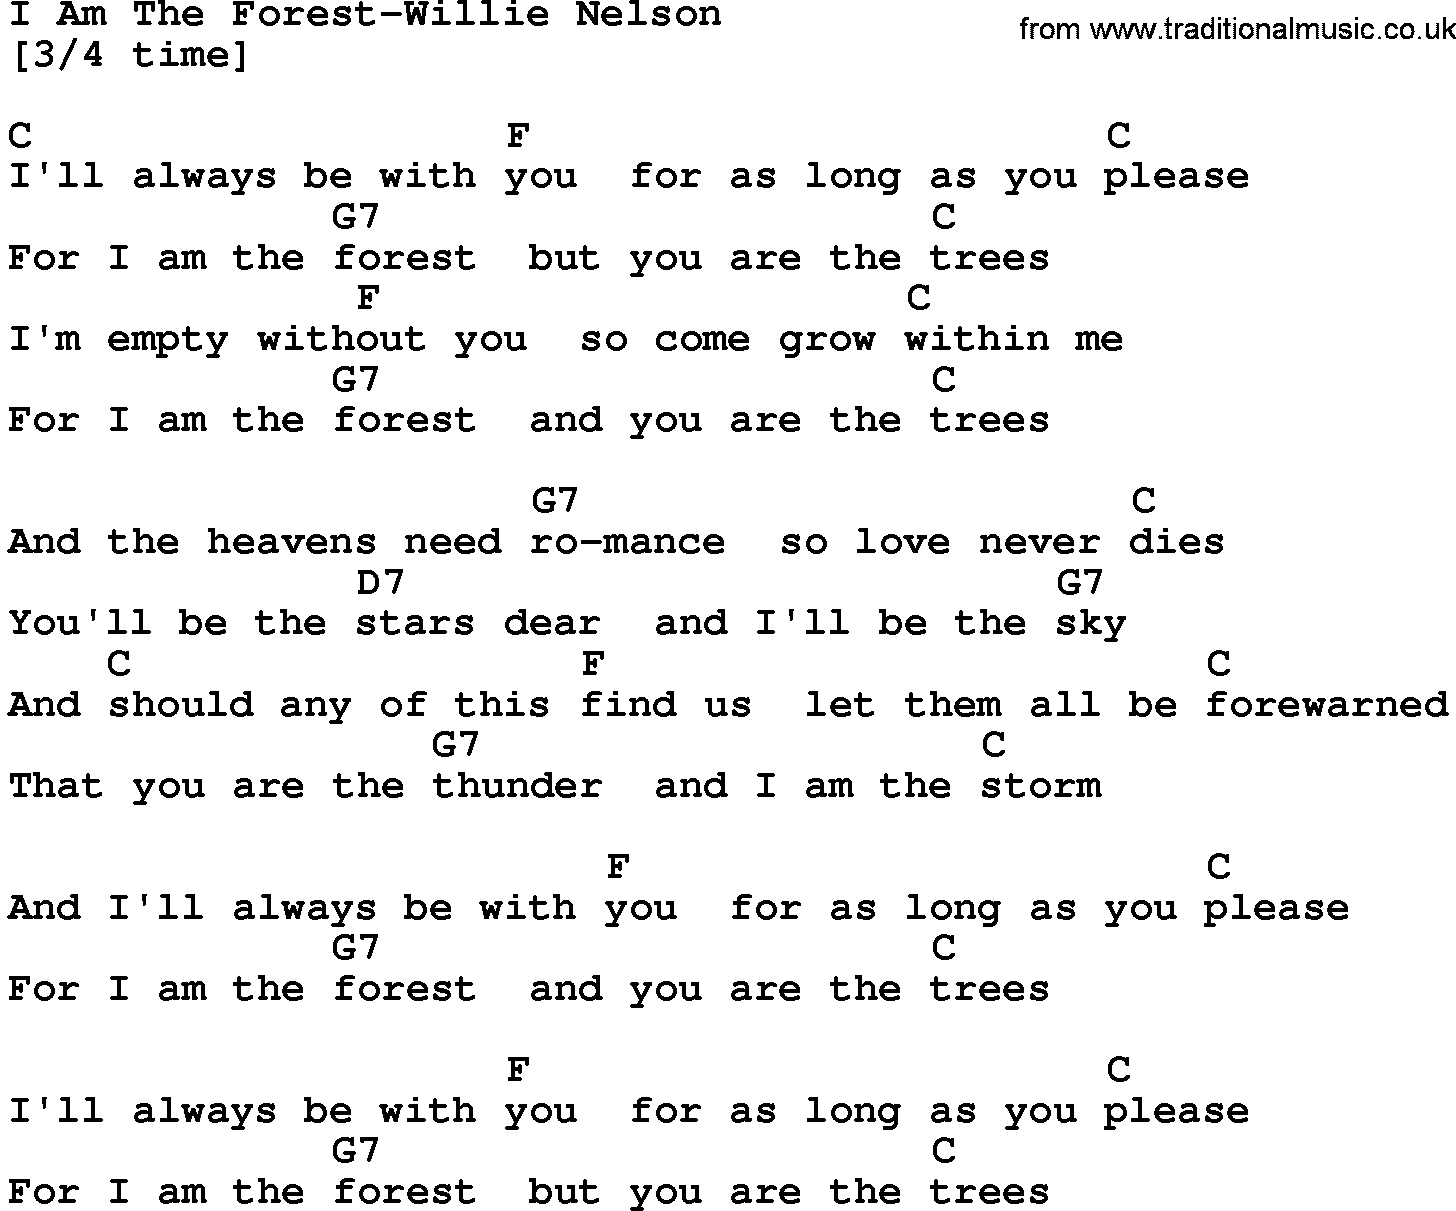 Country music song: I Am The Forest-Willie Nelson lyrics and chords